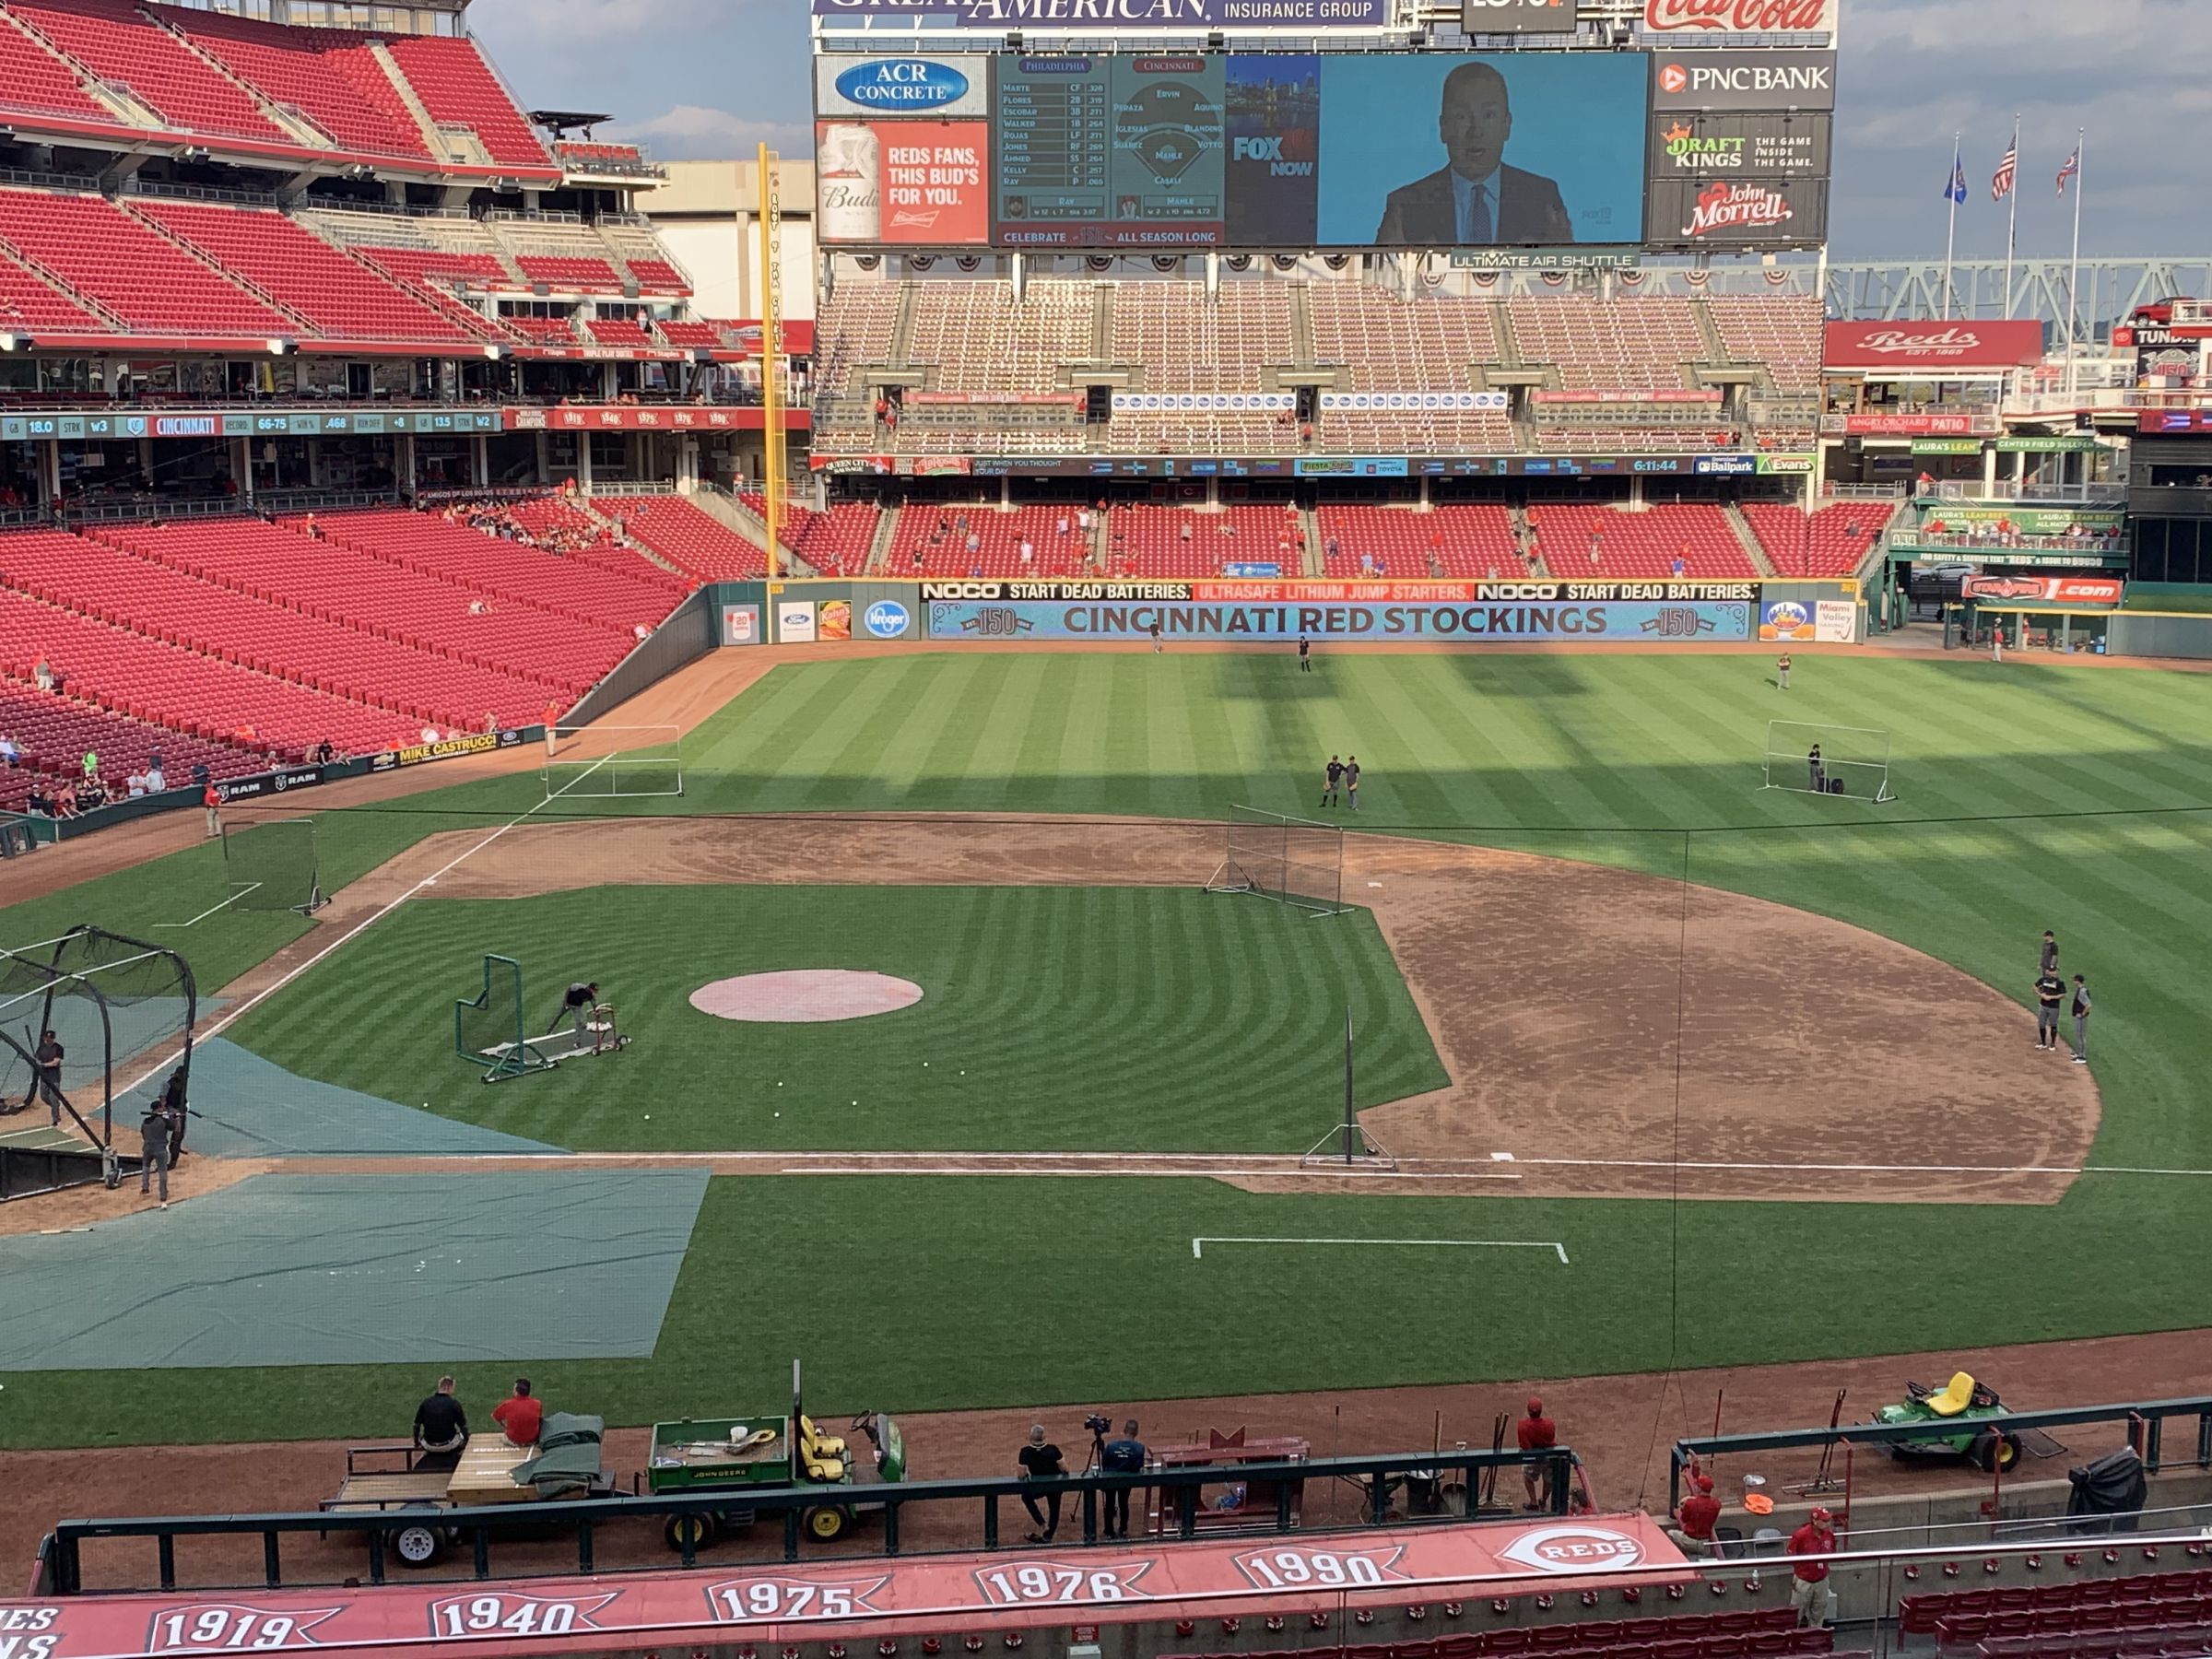 Section 303 at Great American Ball Park 